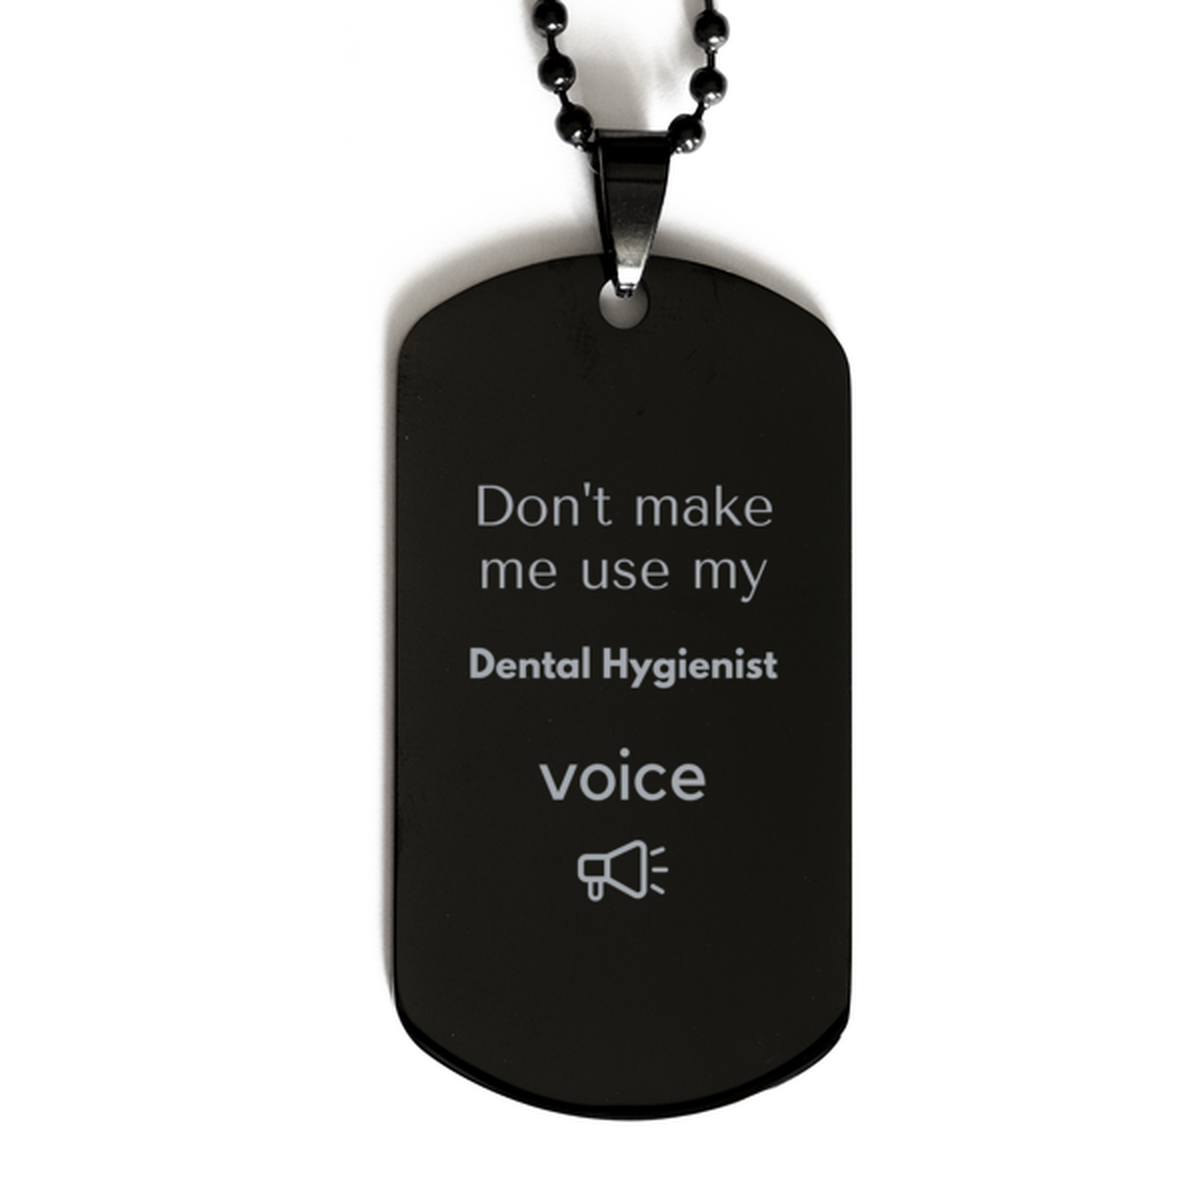 Don't make me use my Dental Hygienist voice, Sarcasm Dental Hygienist Gifts, Christmas Dental Hygienist Black Dog Tag Birthday Unique Gifts For Dental Hygienist Coworkers, Men, Women, Colleague, Friends